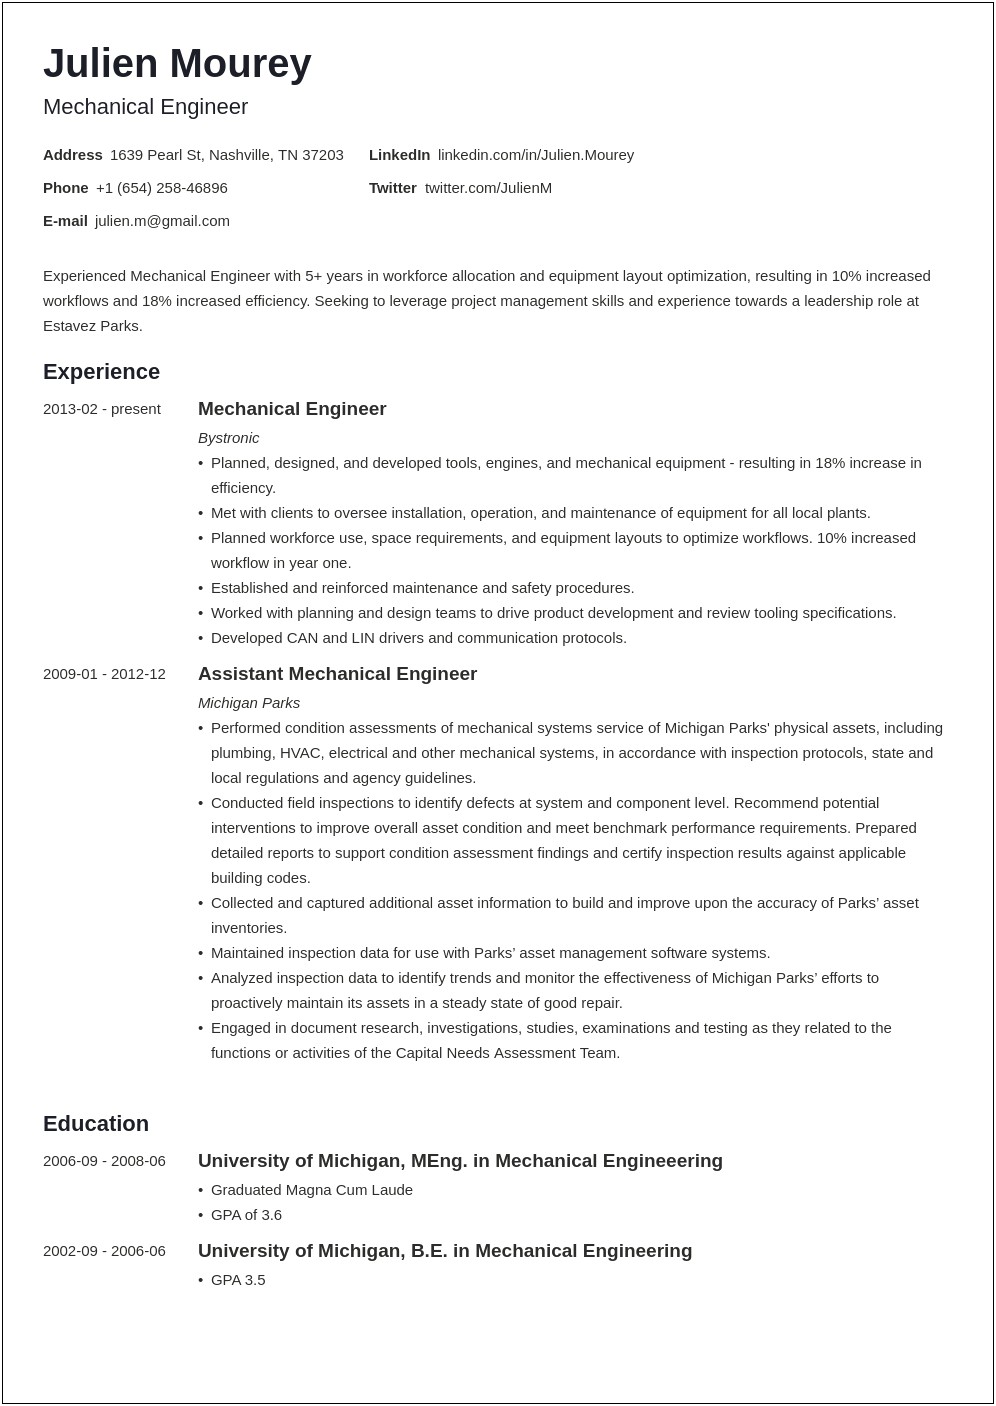 Bachelors Mechannical And Masters Industrial Management Resume